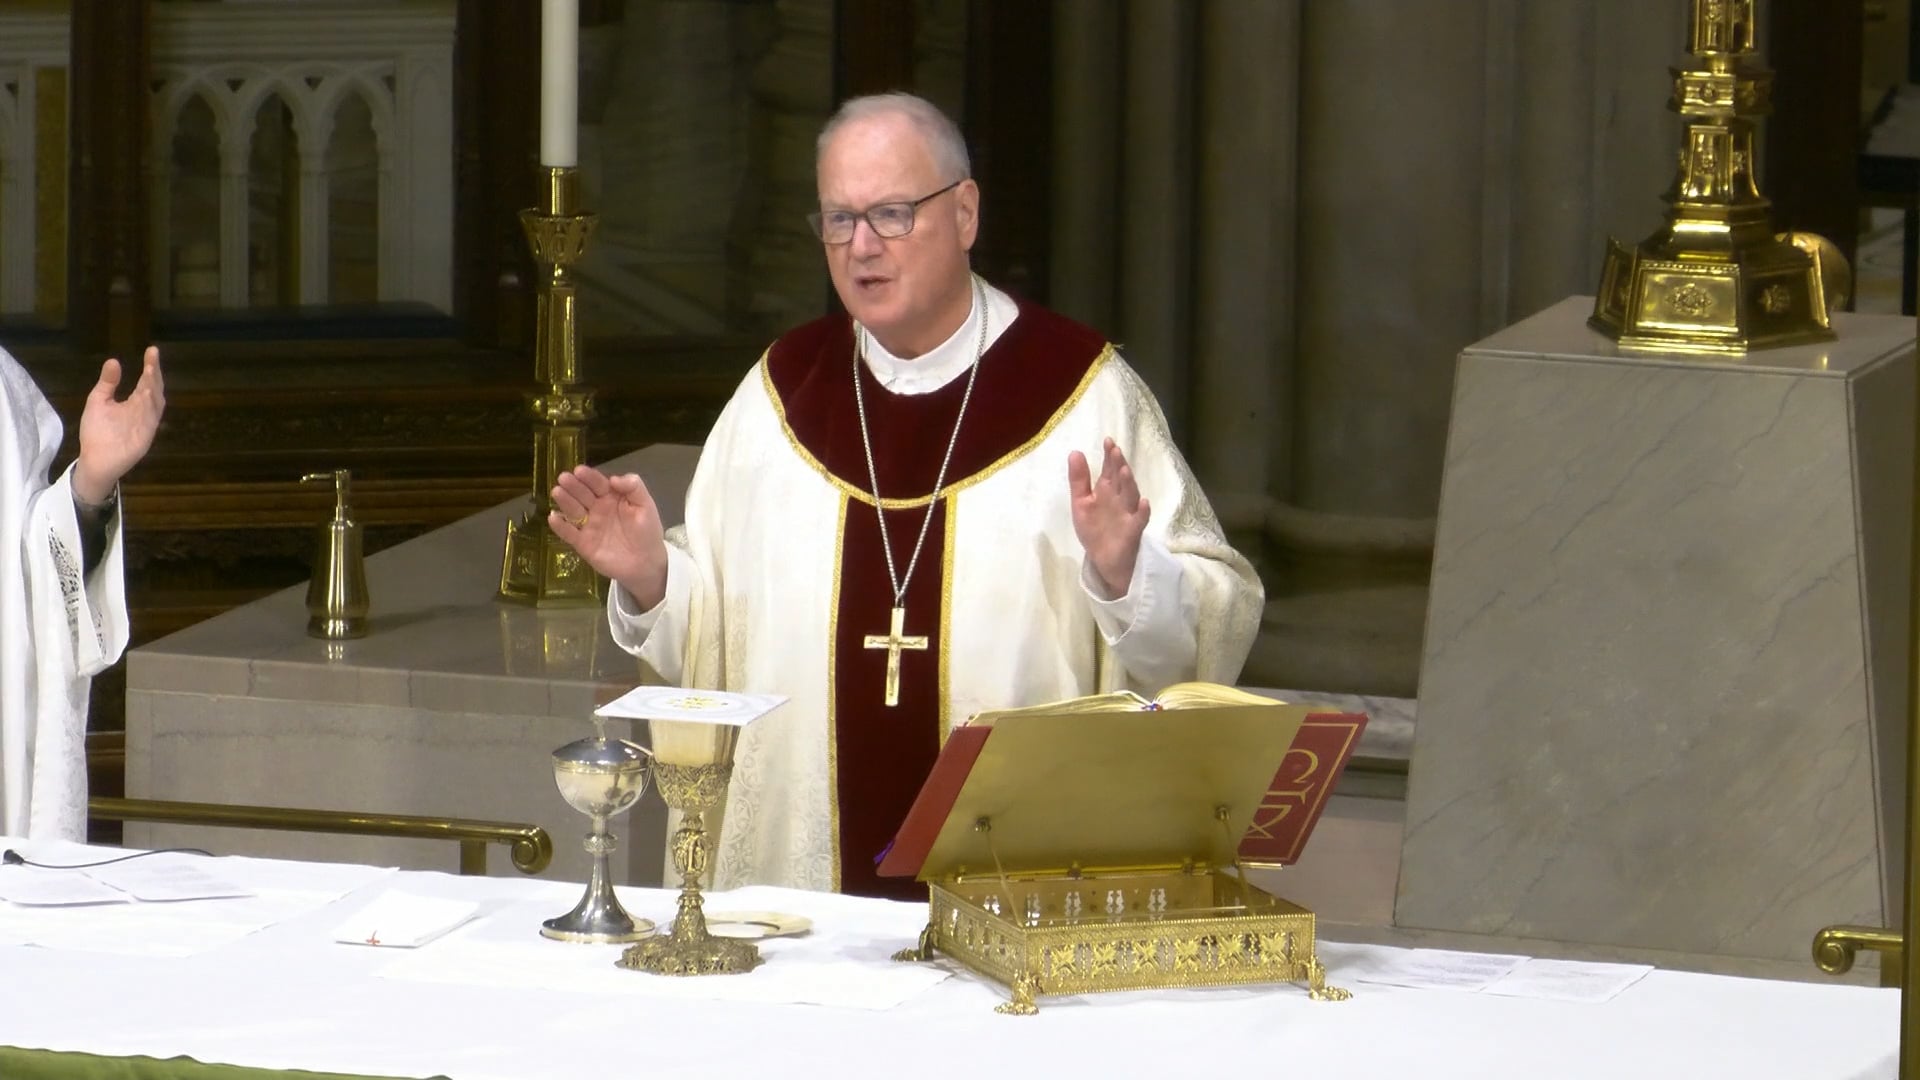 Mass from St. Patrick's Cathedral - September 27, 2022